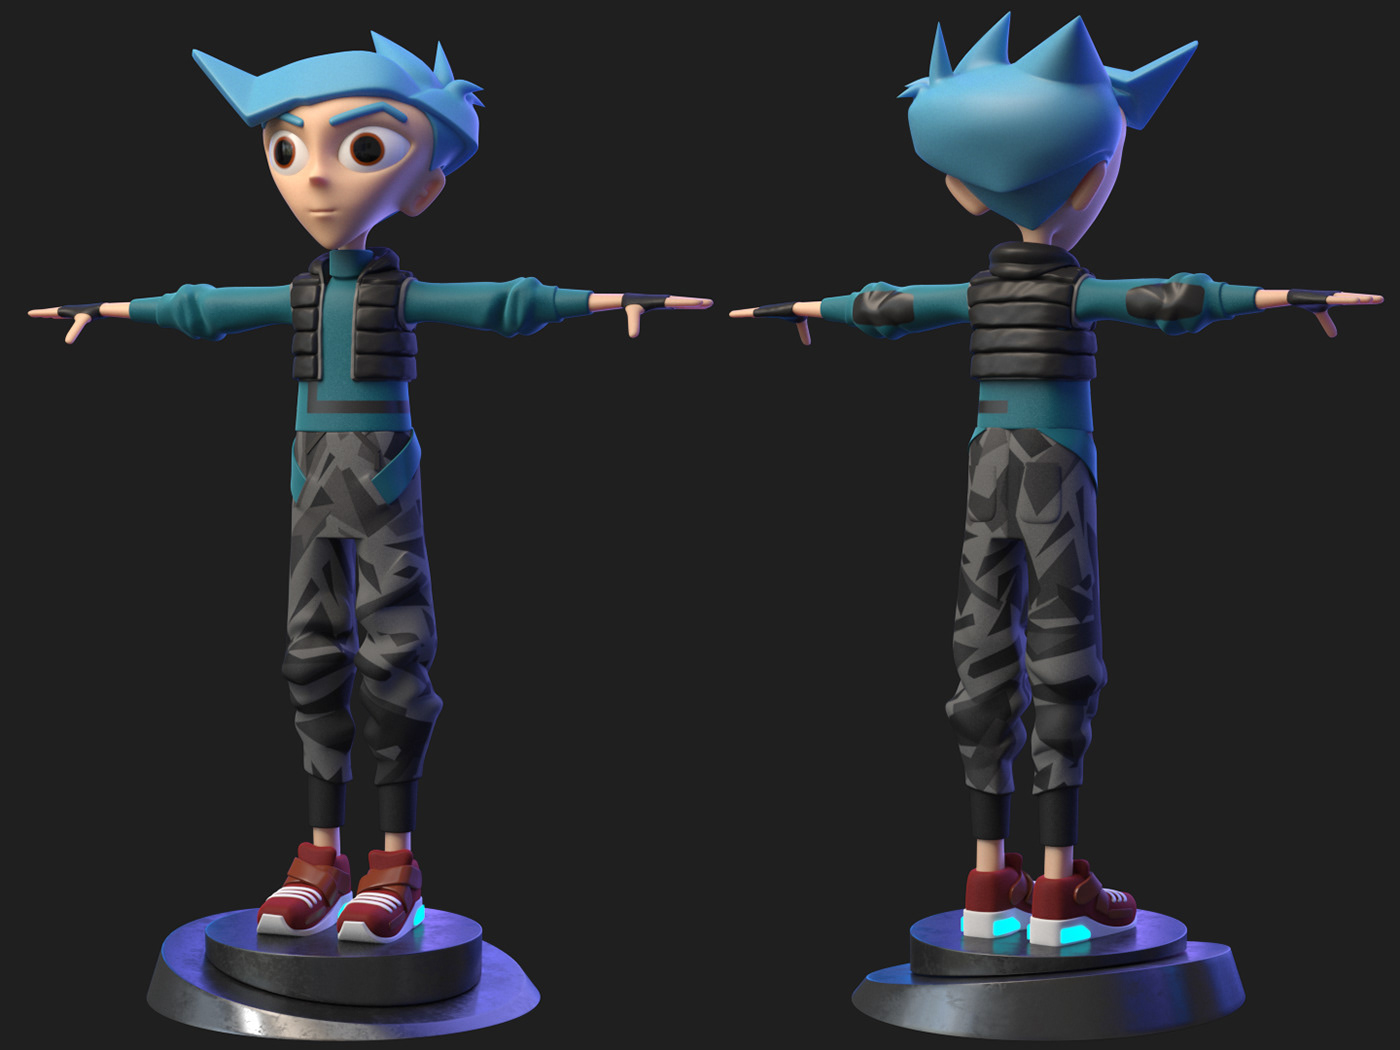 3D 3D Character modeling cartoon characters character modeling model 3d